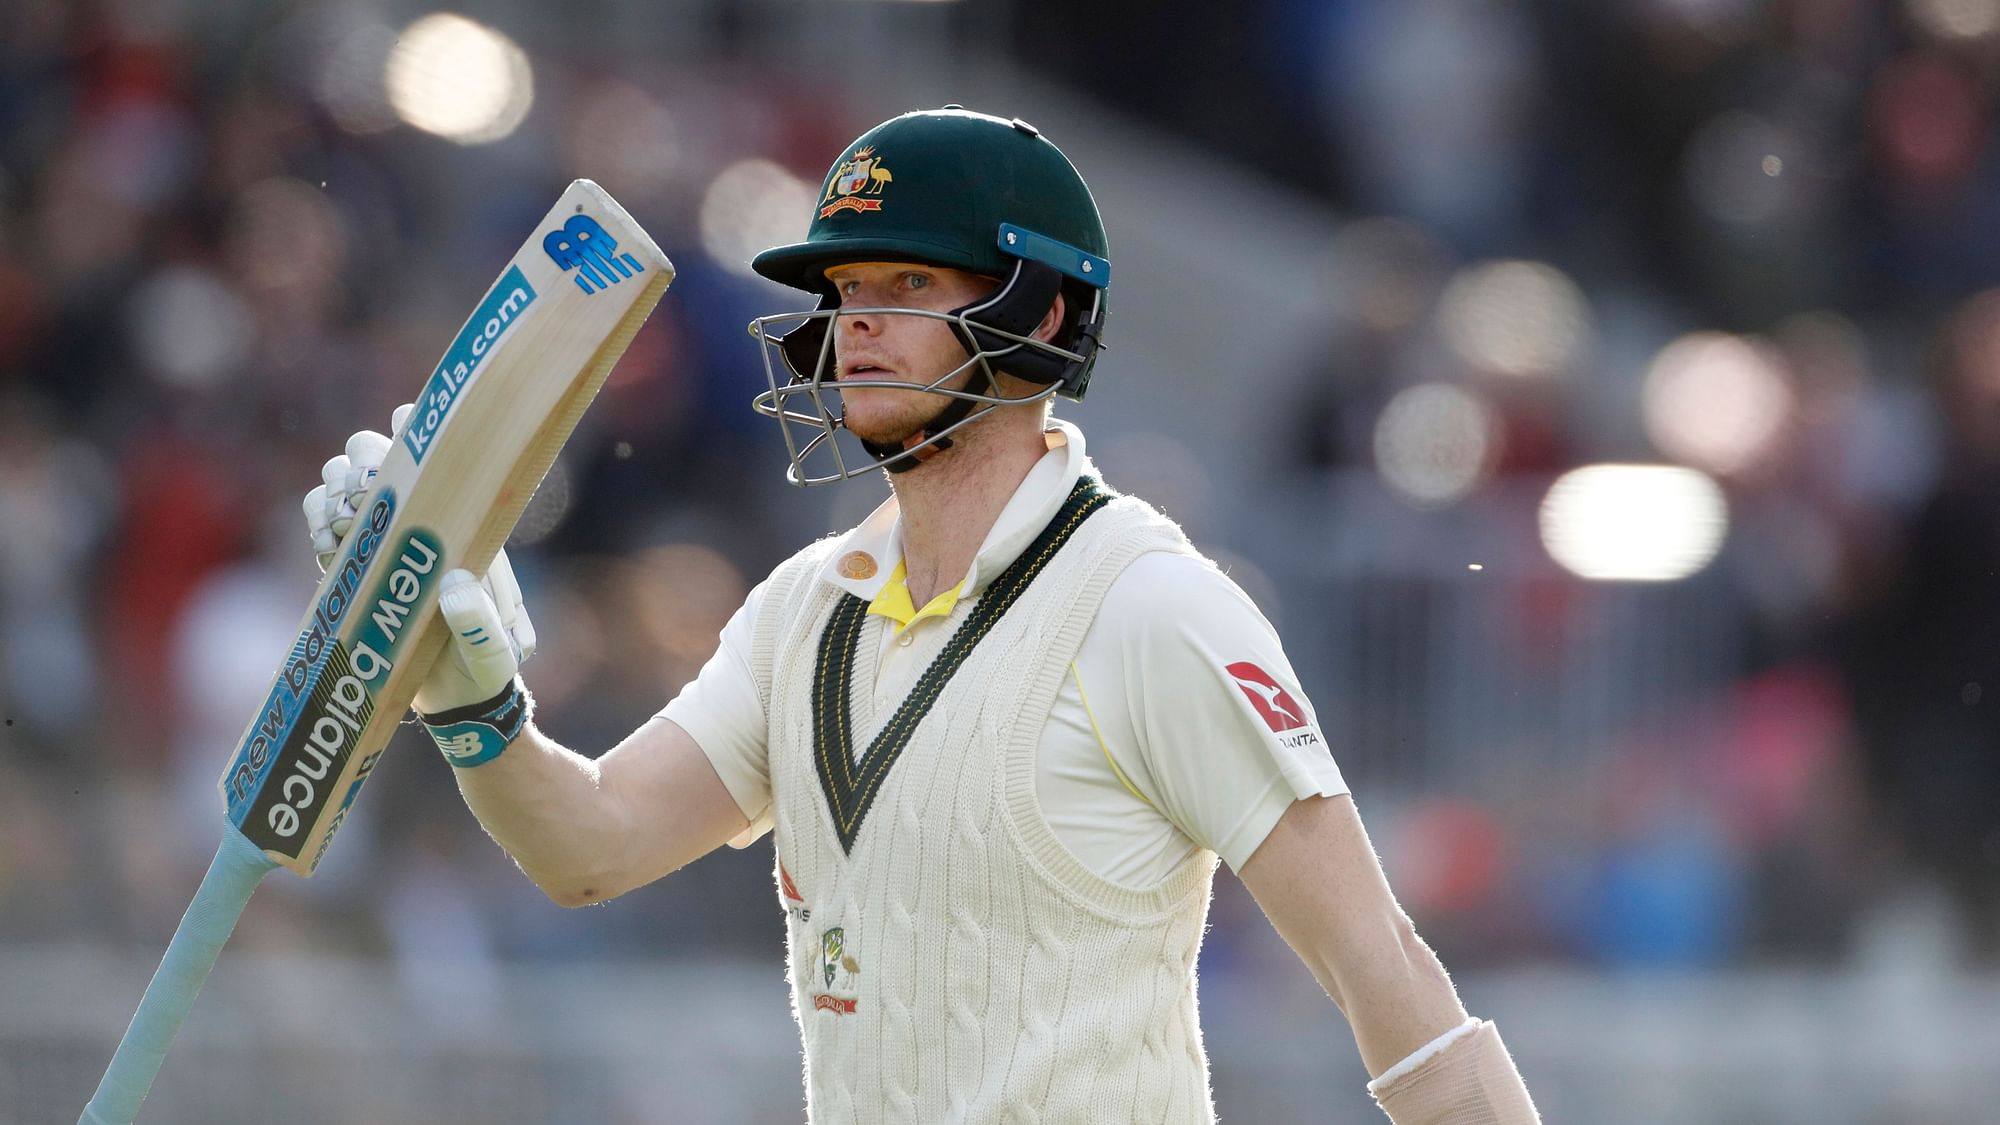 On the first day of the Boxing Day Test against New Zealand, Smith went past former Test captain Greg Chappell’s tally of 7,110 runs.